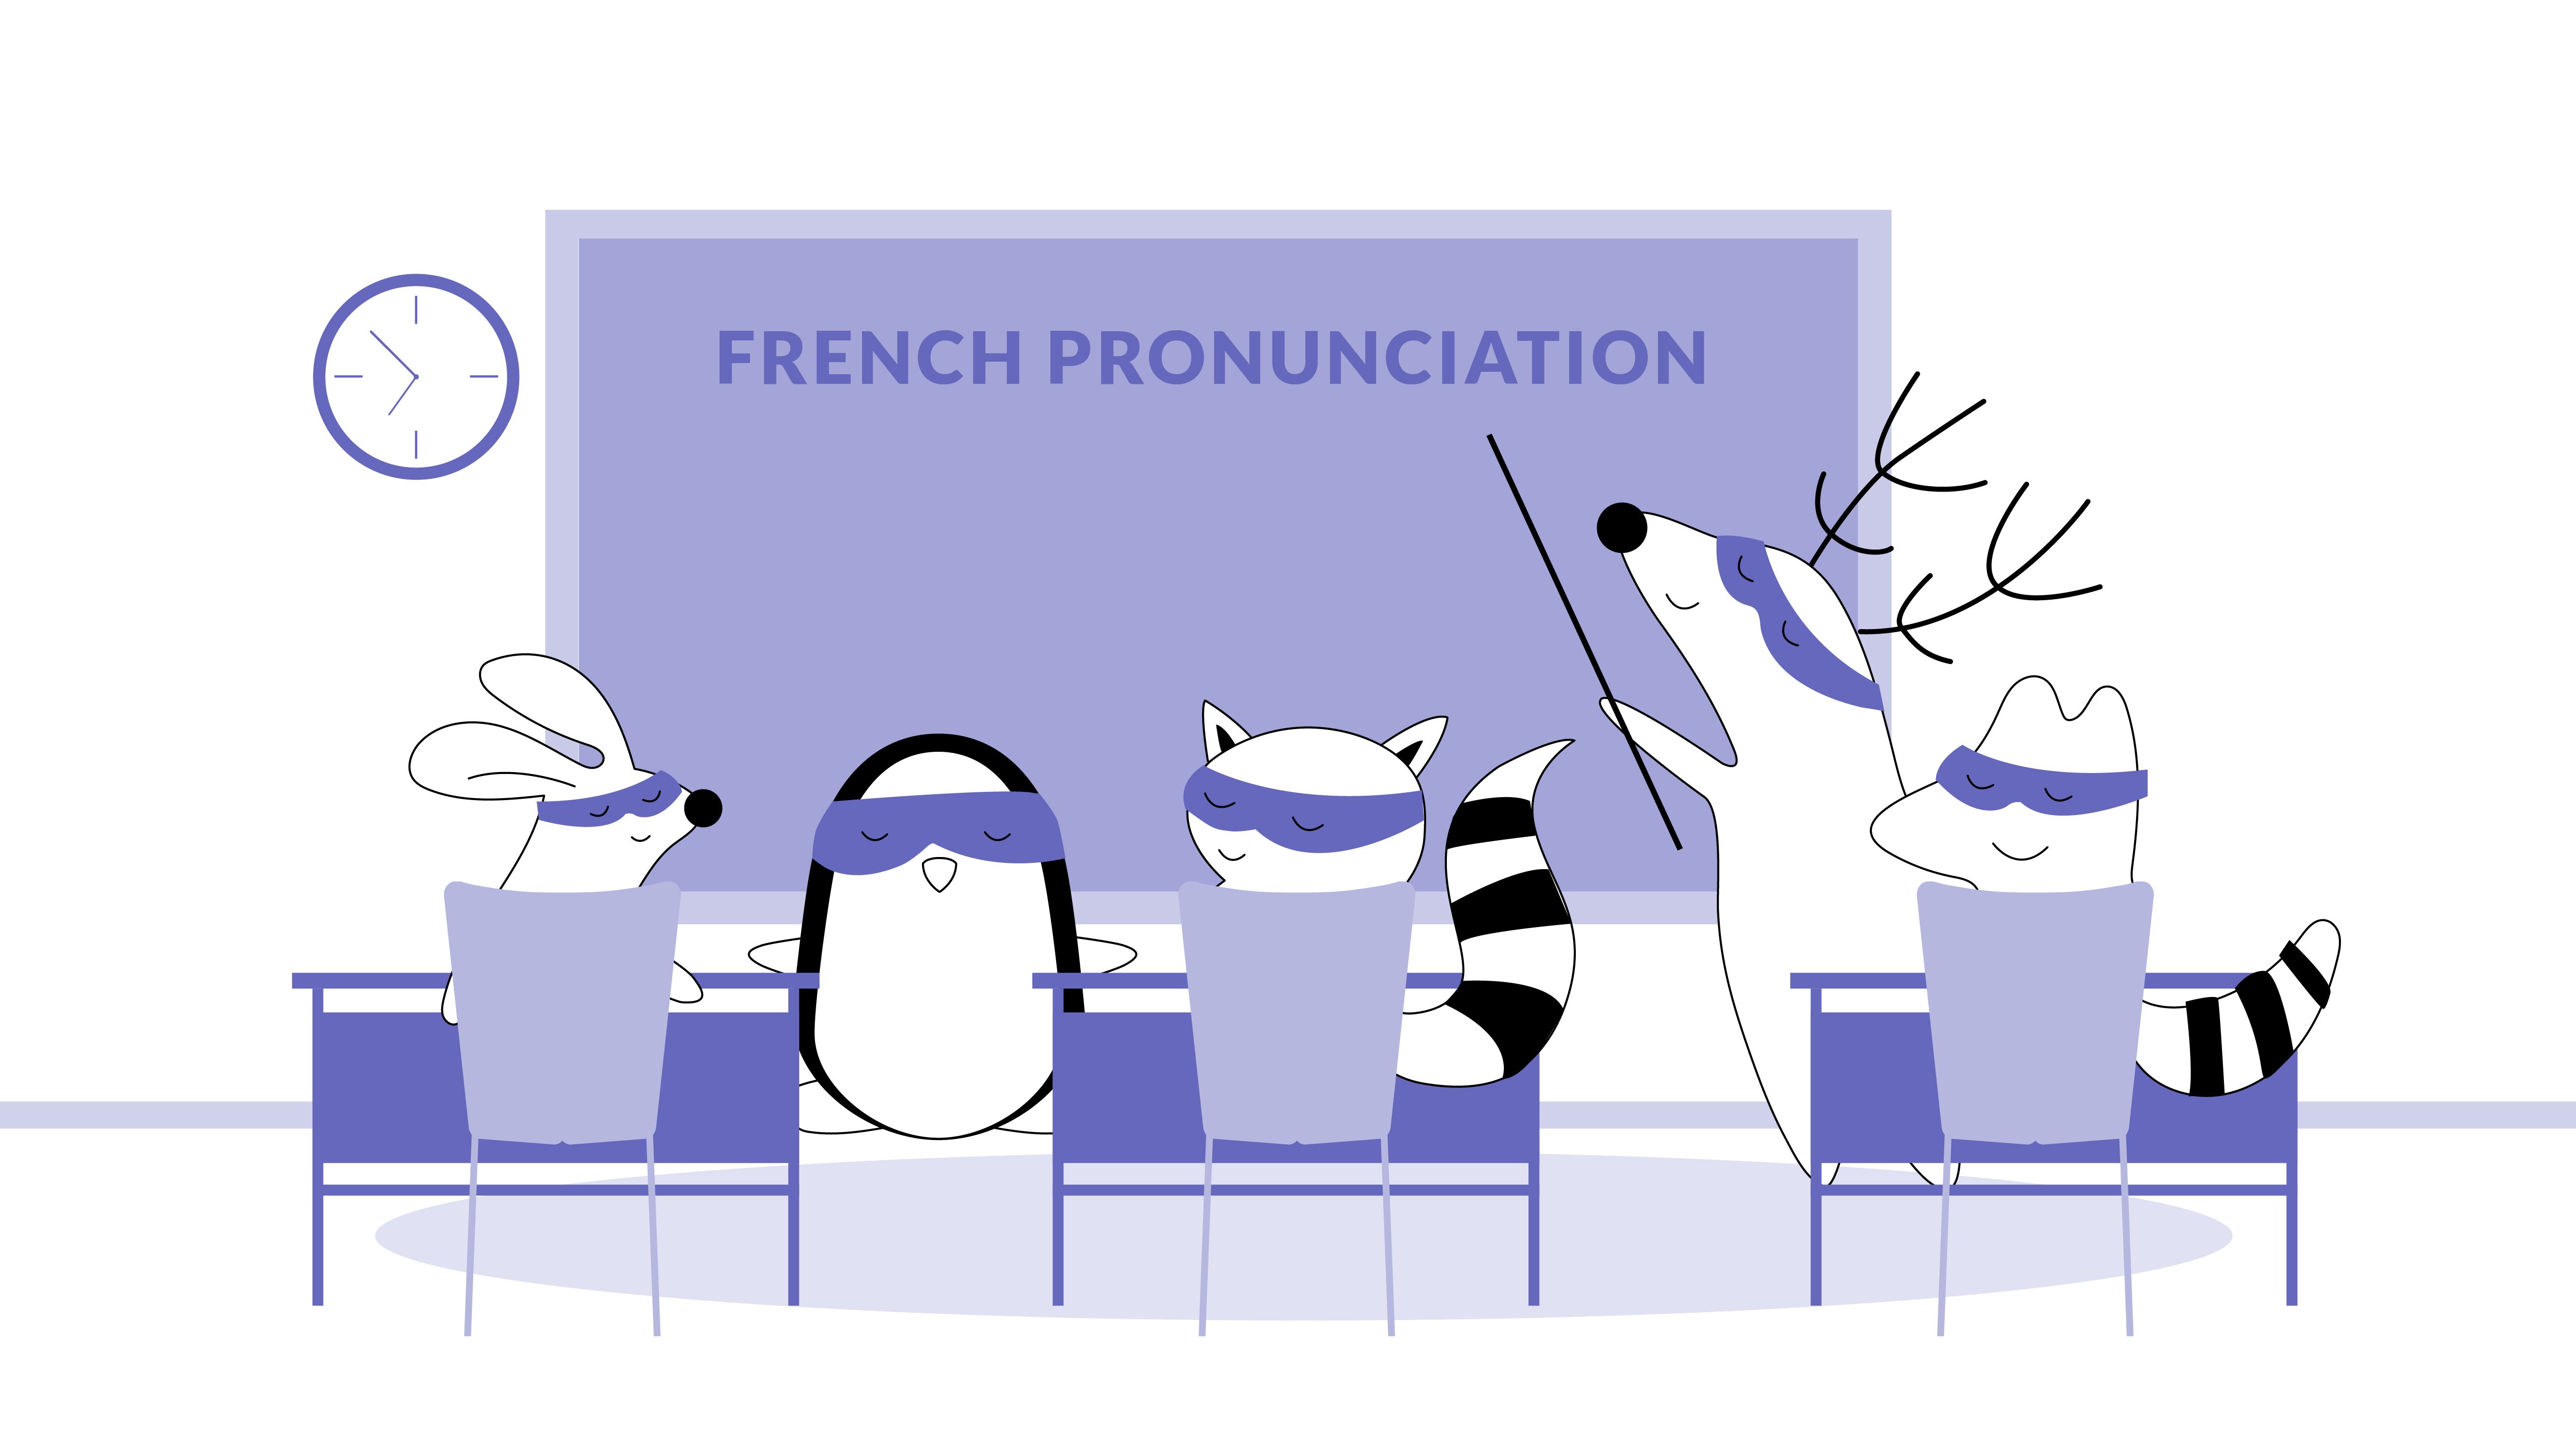 A classroom setting where Iggy, Pocky, and Benji are learning French grammar from top-rated books, with Soren as a teacher pointing to important concepts on a blackboard.